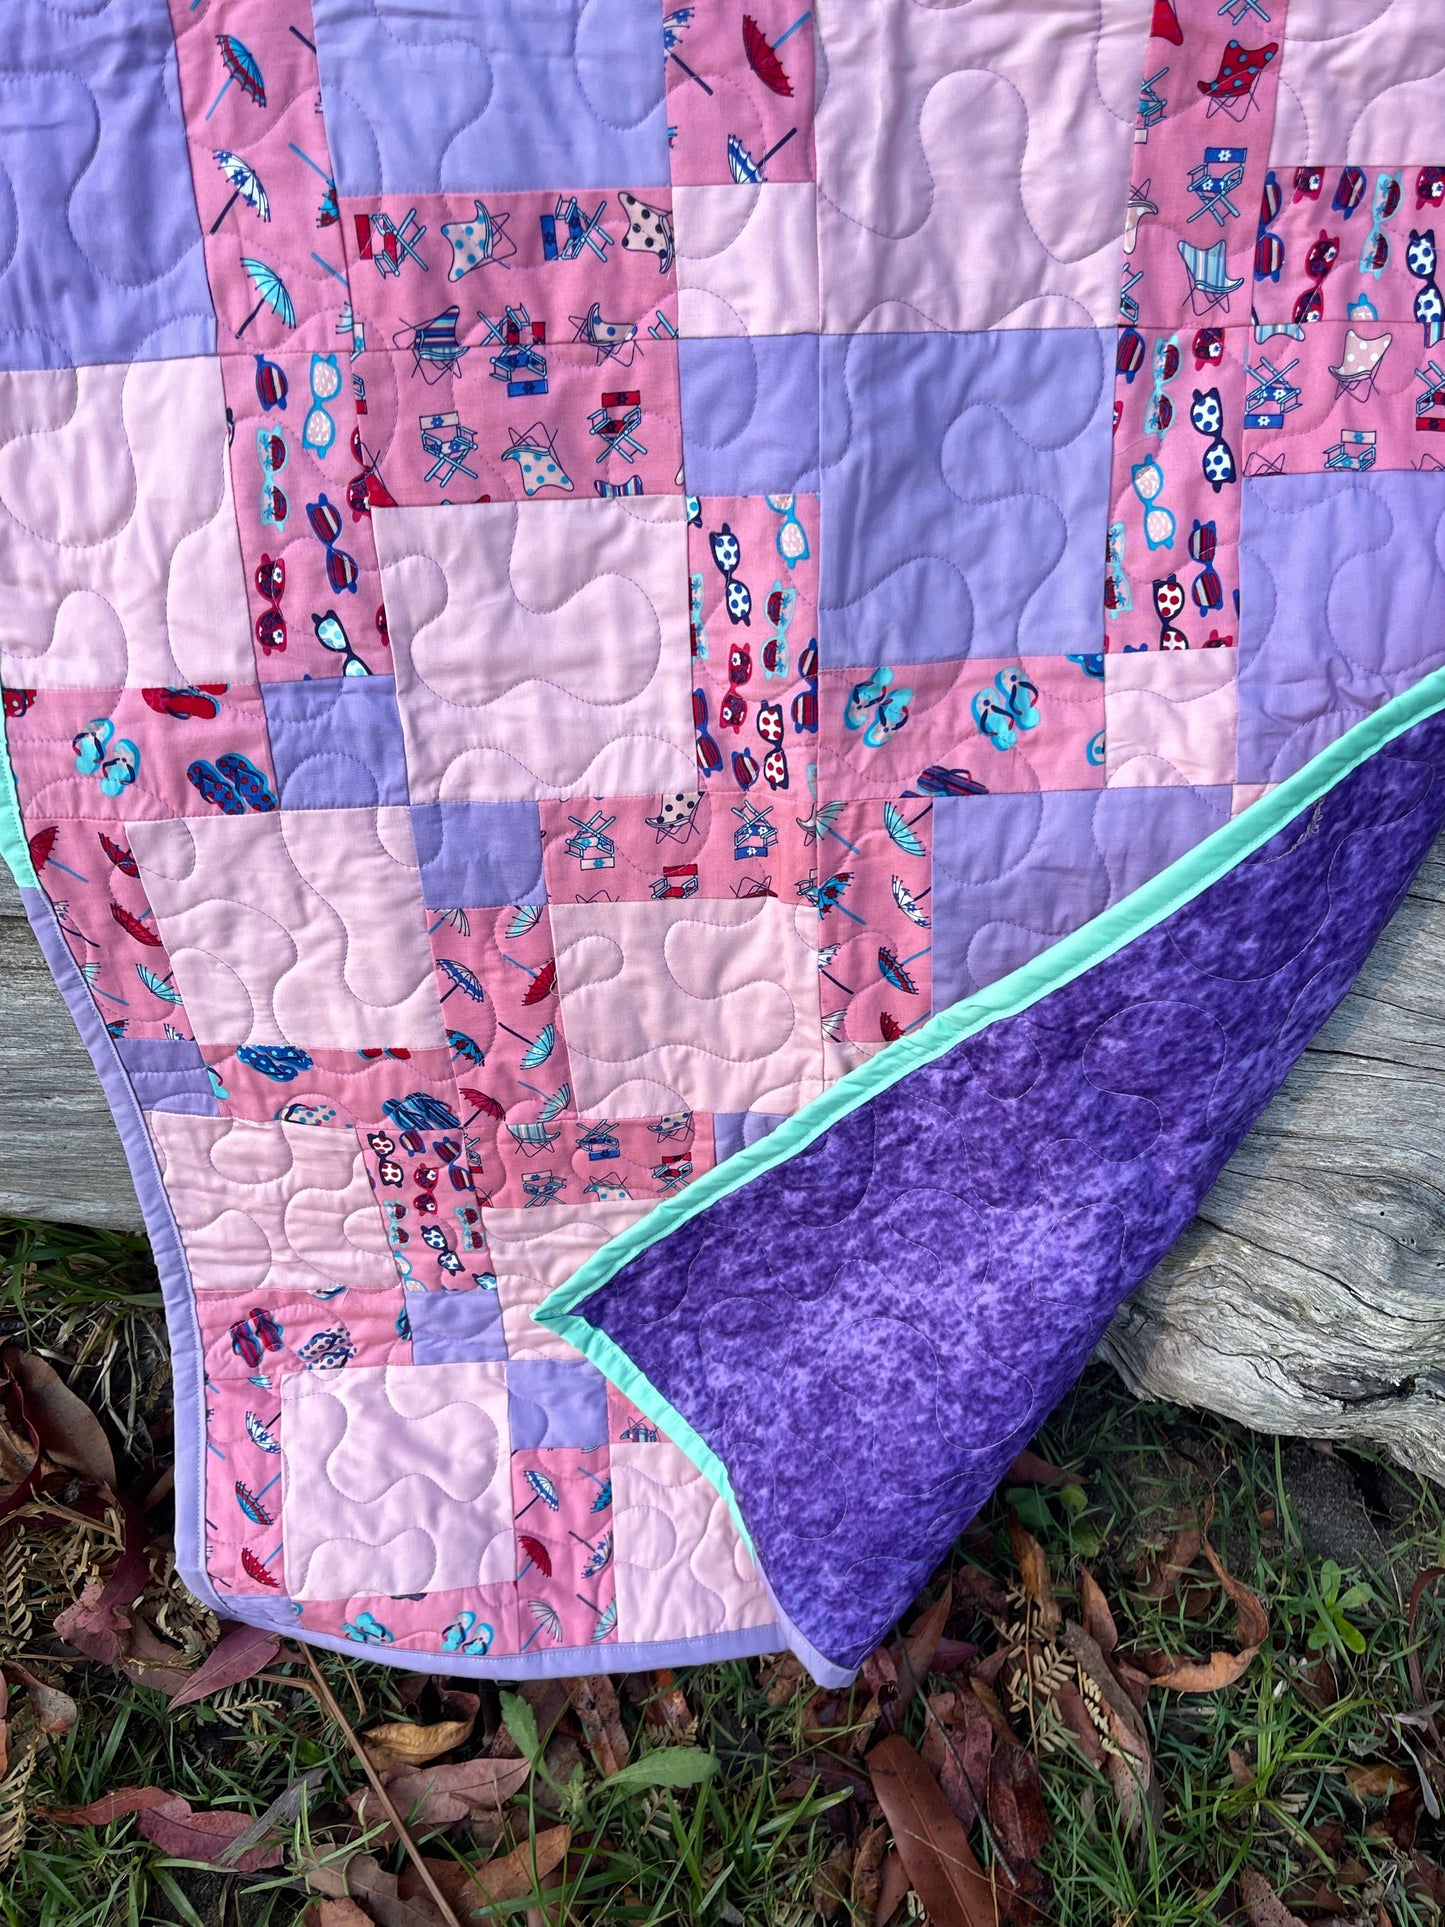 Baby Girl Quilt Finished Size 25.5" x 38.5" Approx